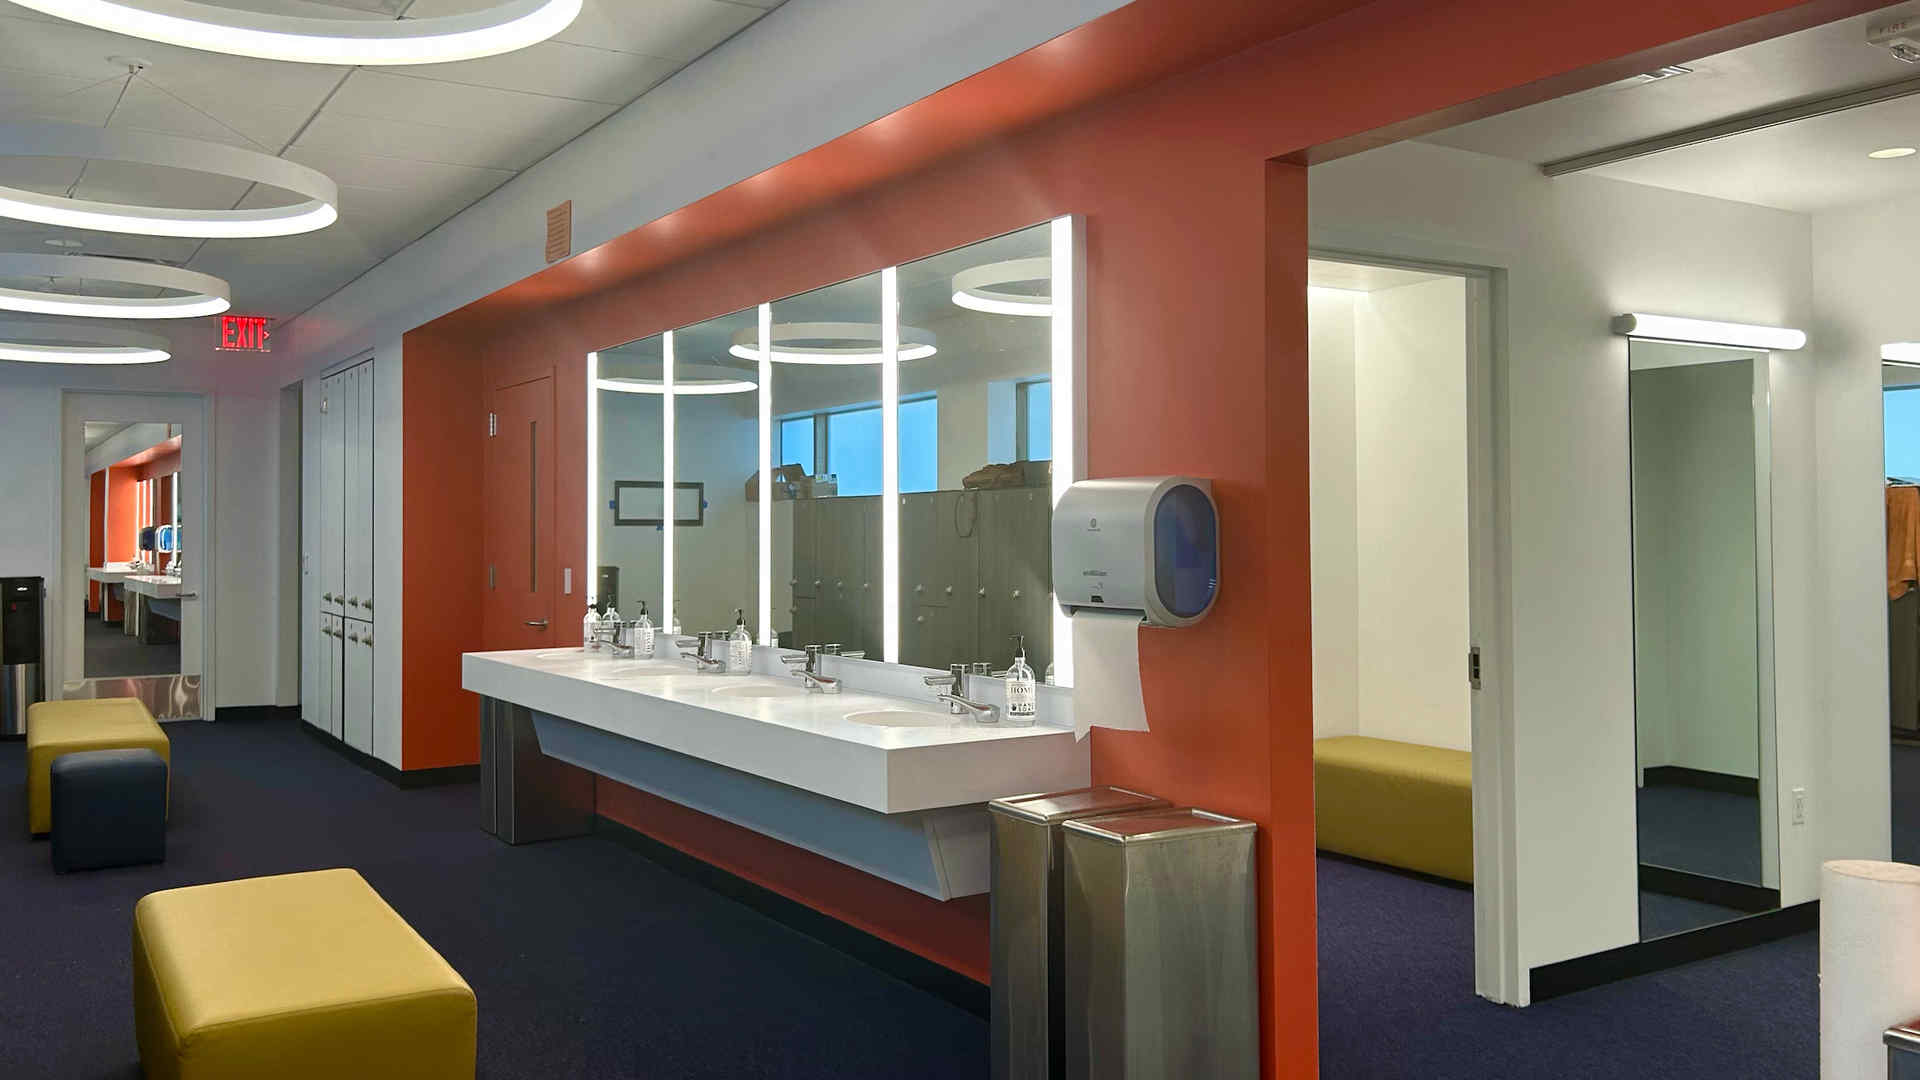 Image of the interior of the newly renovated space showing a dressing room with mirrors, sinks, seating area, and lockers